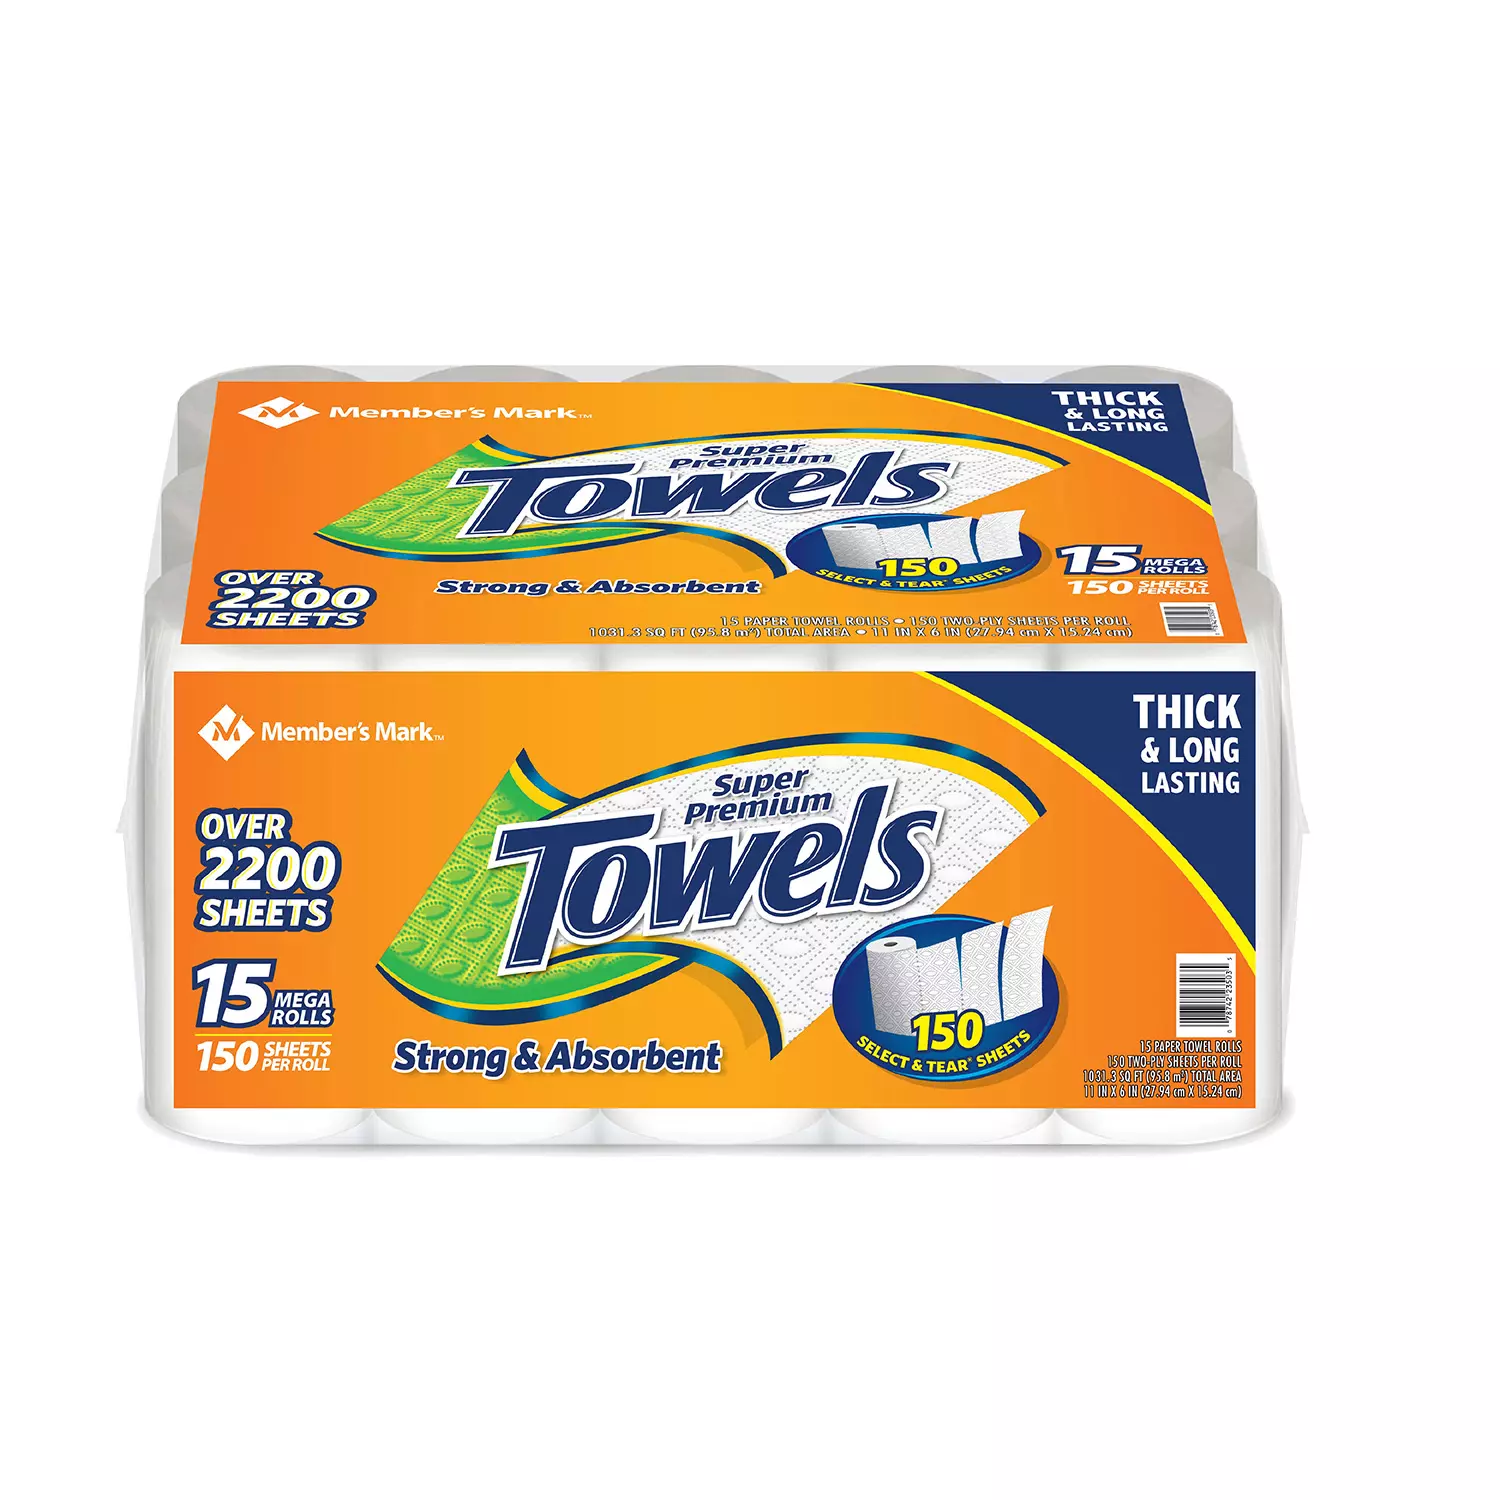 Member’s Mark Super Premium Individually Wrapped Paper Towels (15 rolls, 150 sheets per roll)